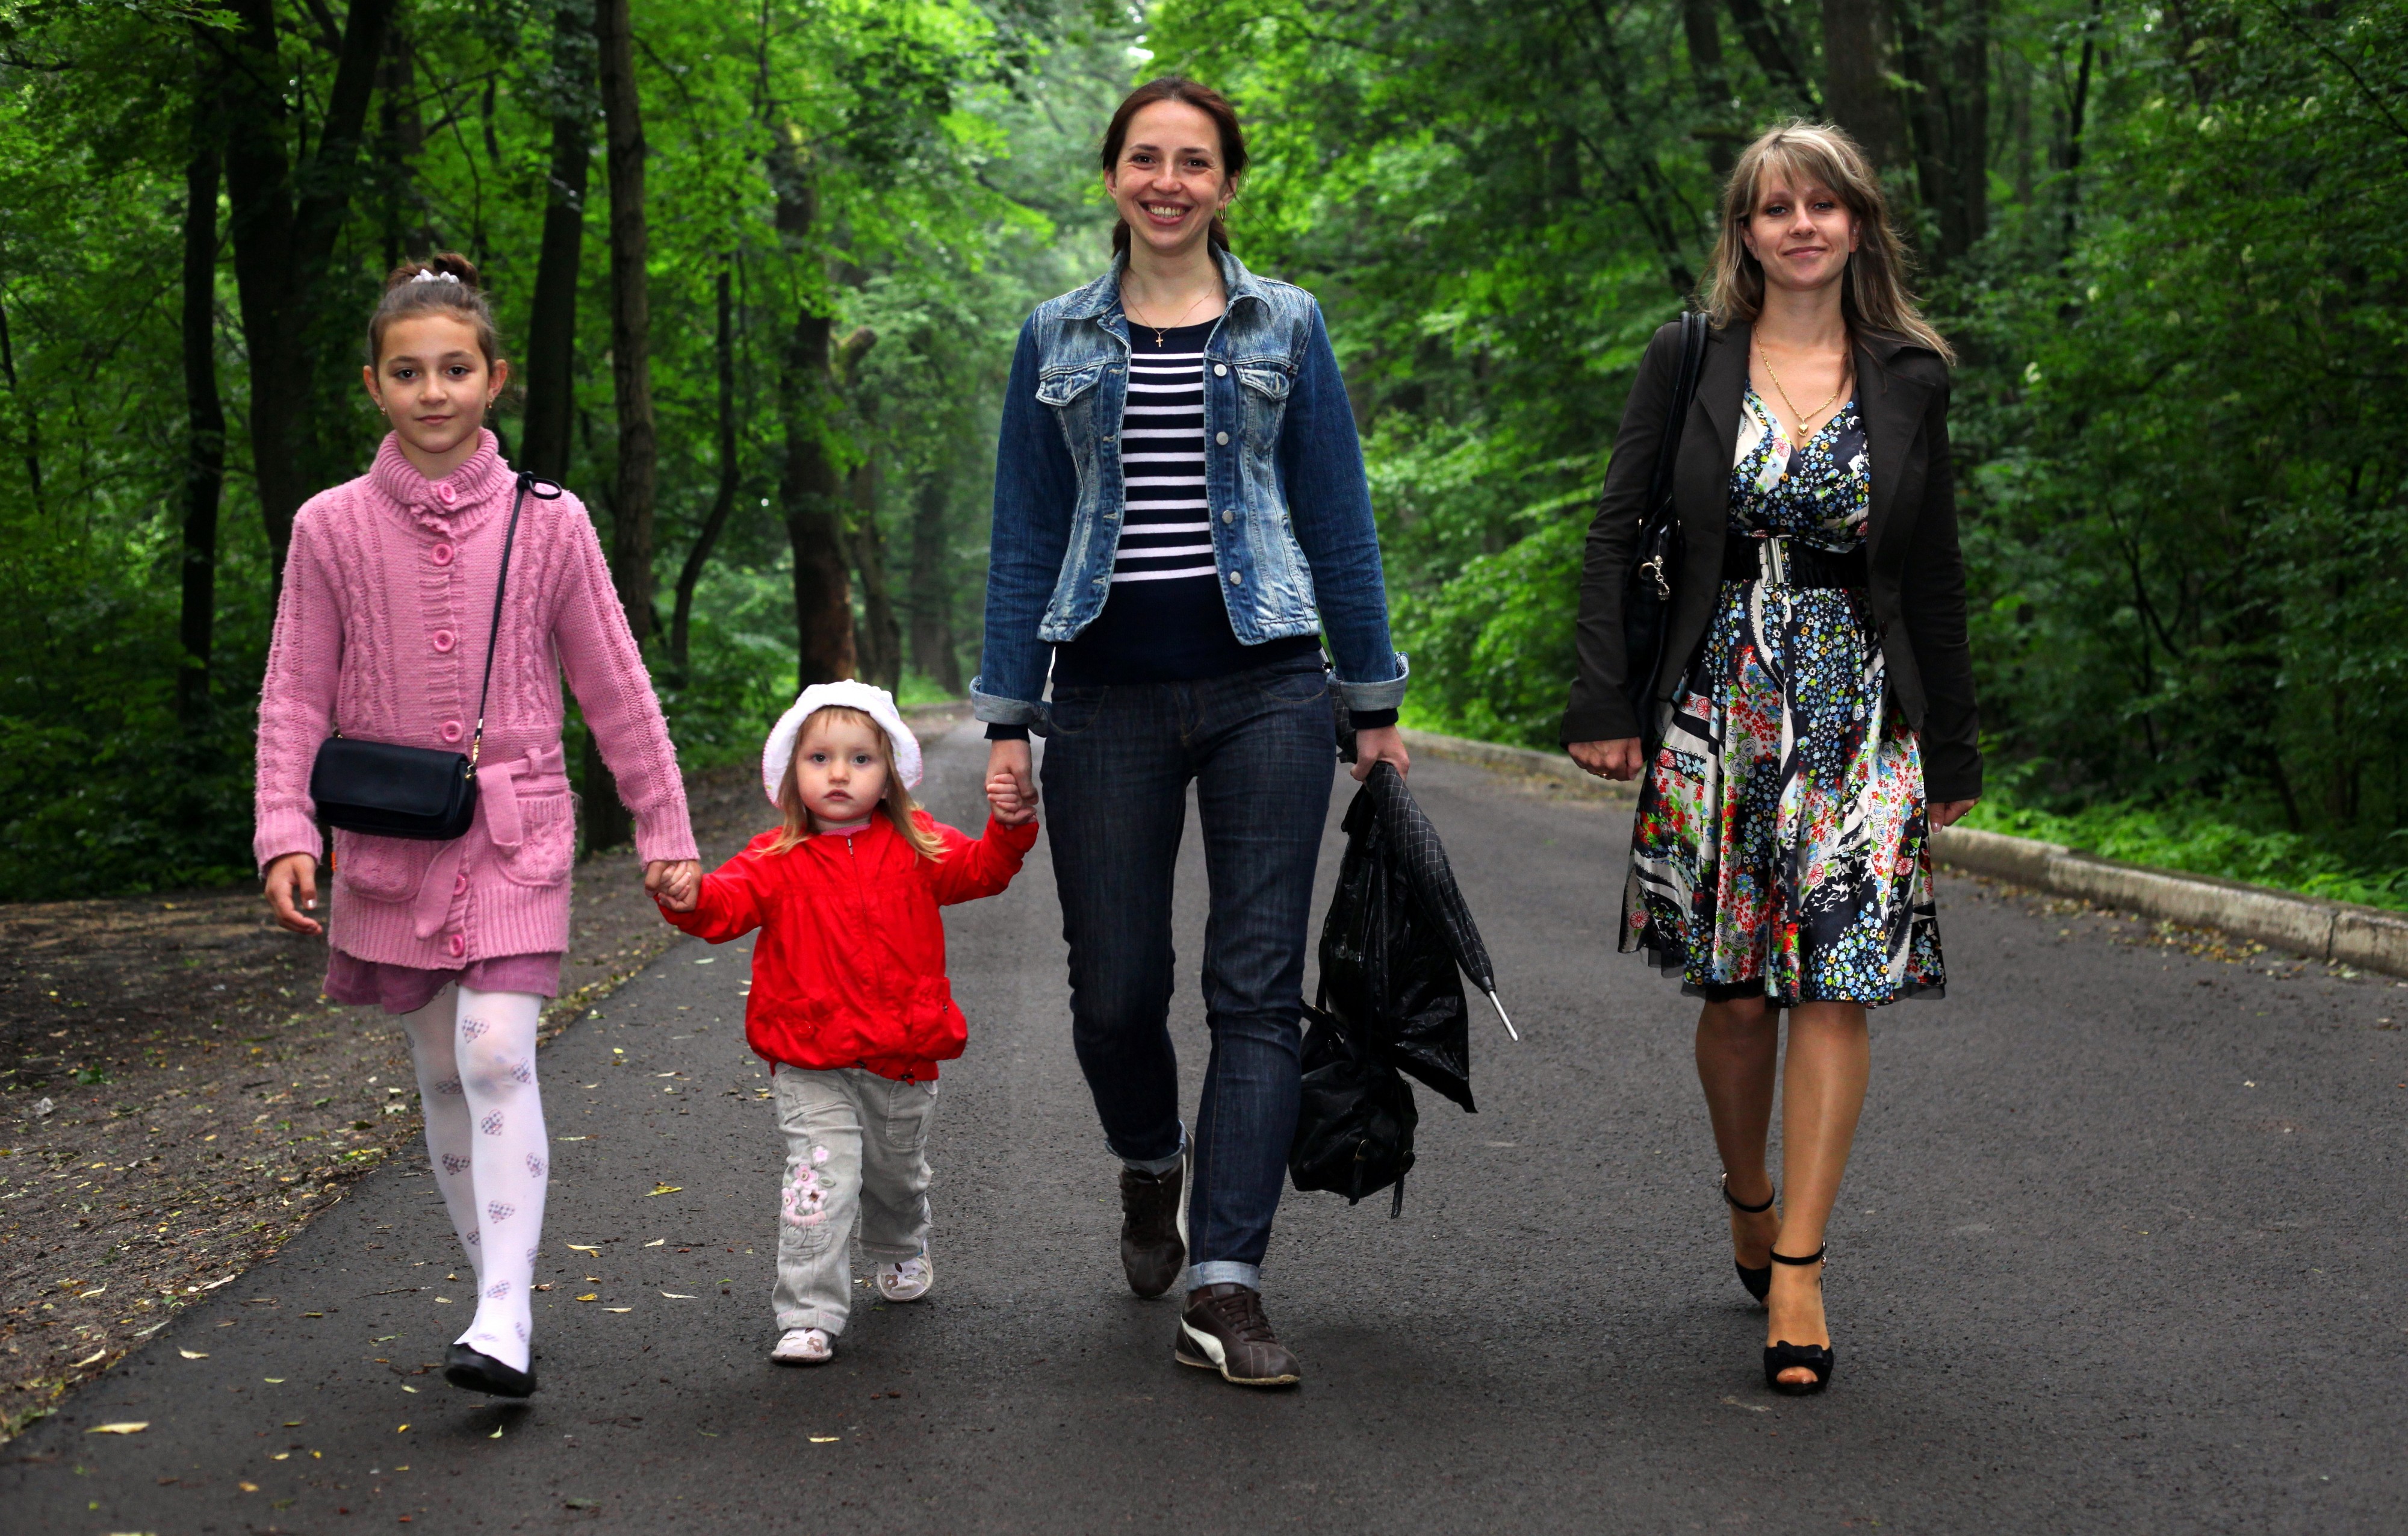 four young Catholic females walking through a park in June 2013